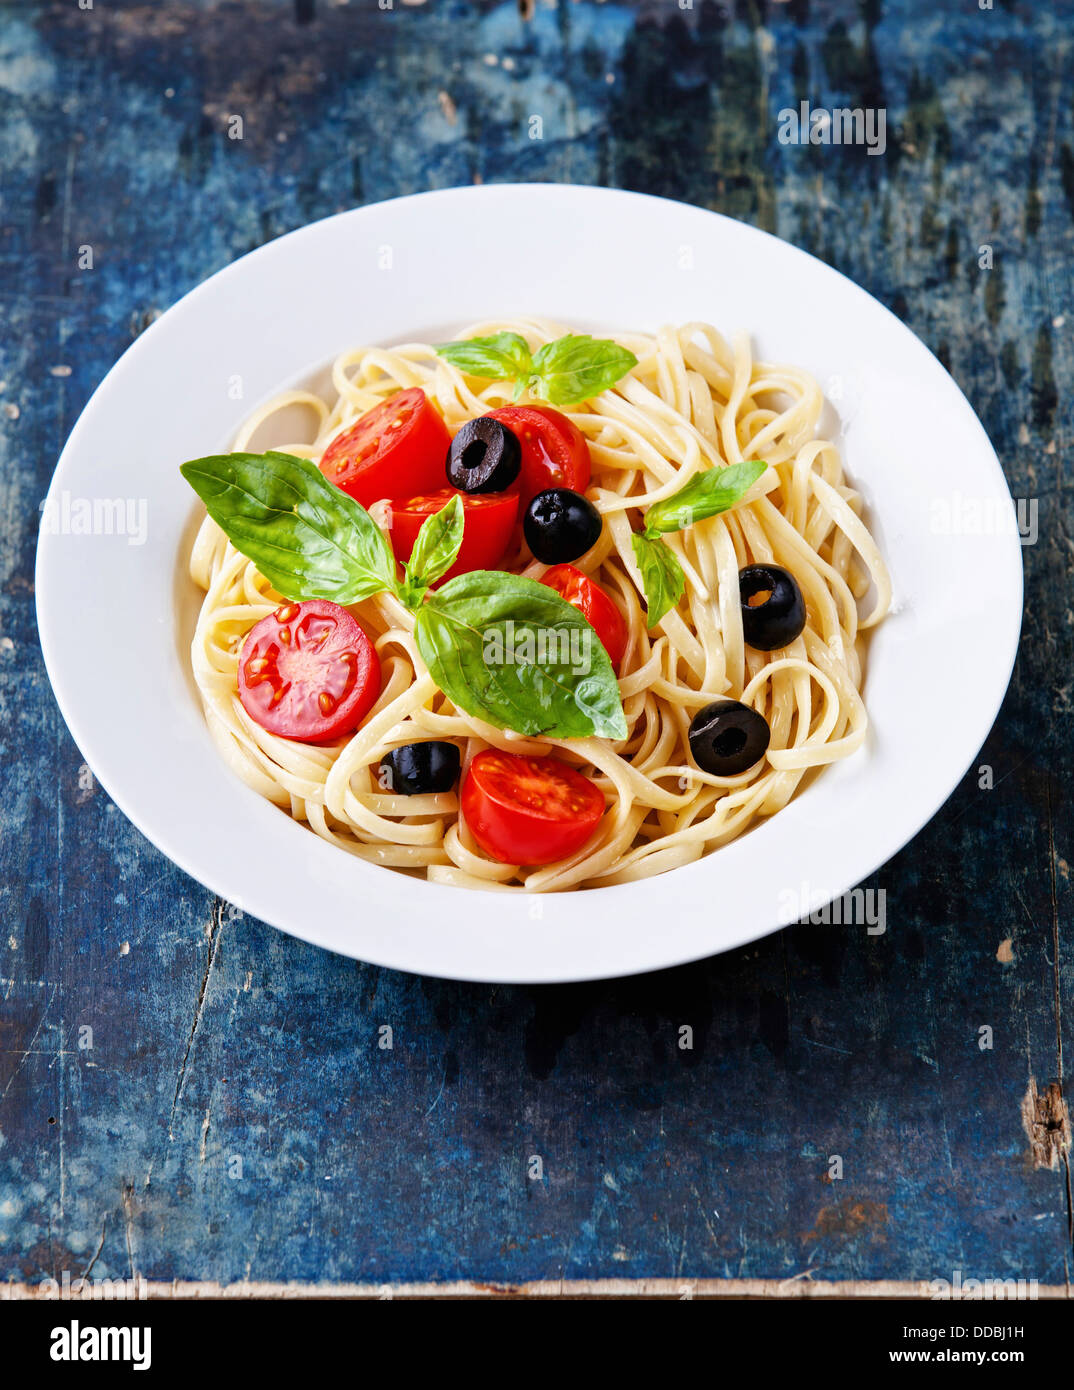 Pasta with tomato and basil on blue wooden background Stock Photo